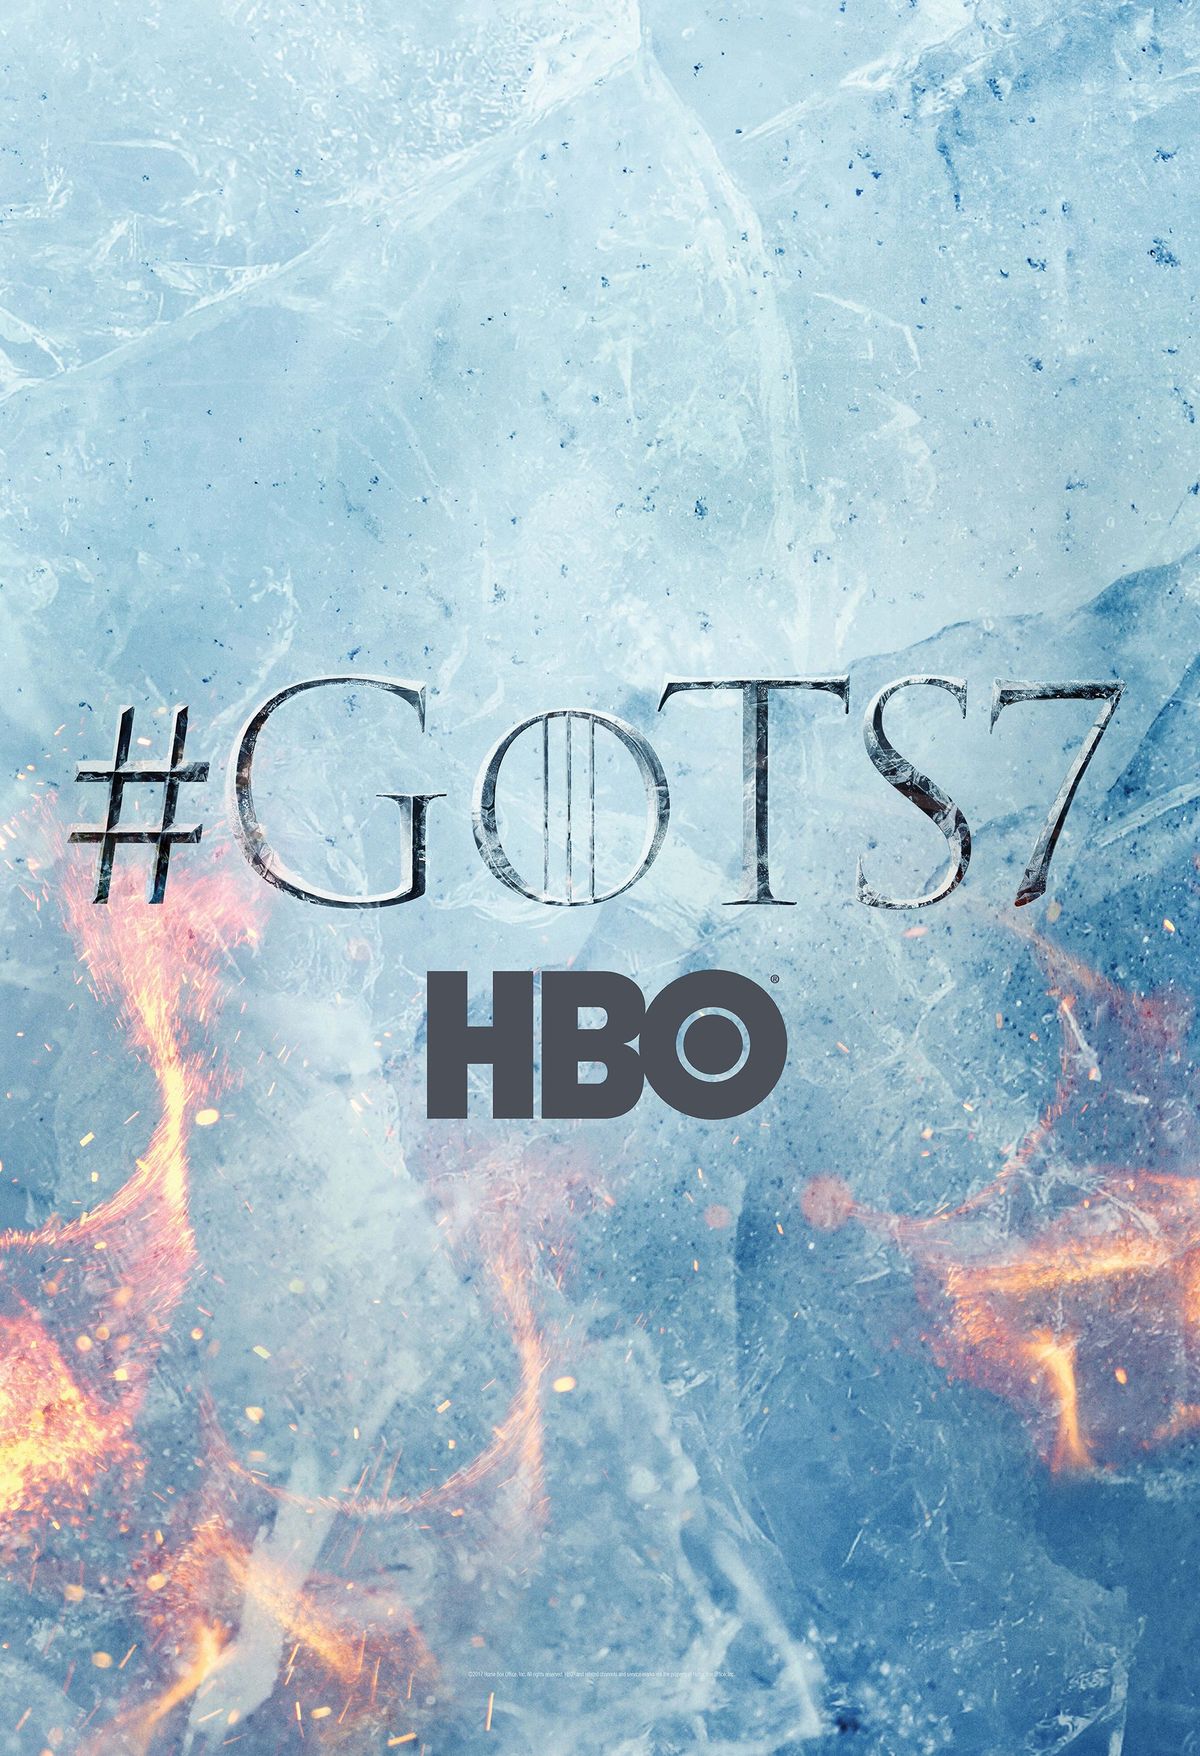 LOOK: New Game of Thrones Season 7 Poster Pits Fire Against Ice